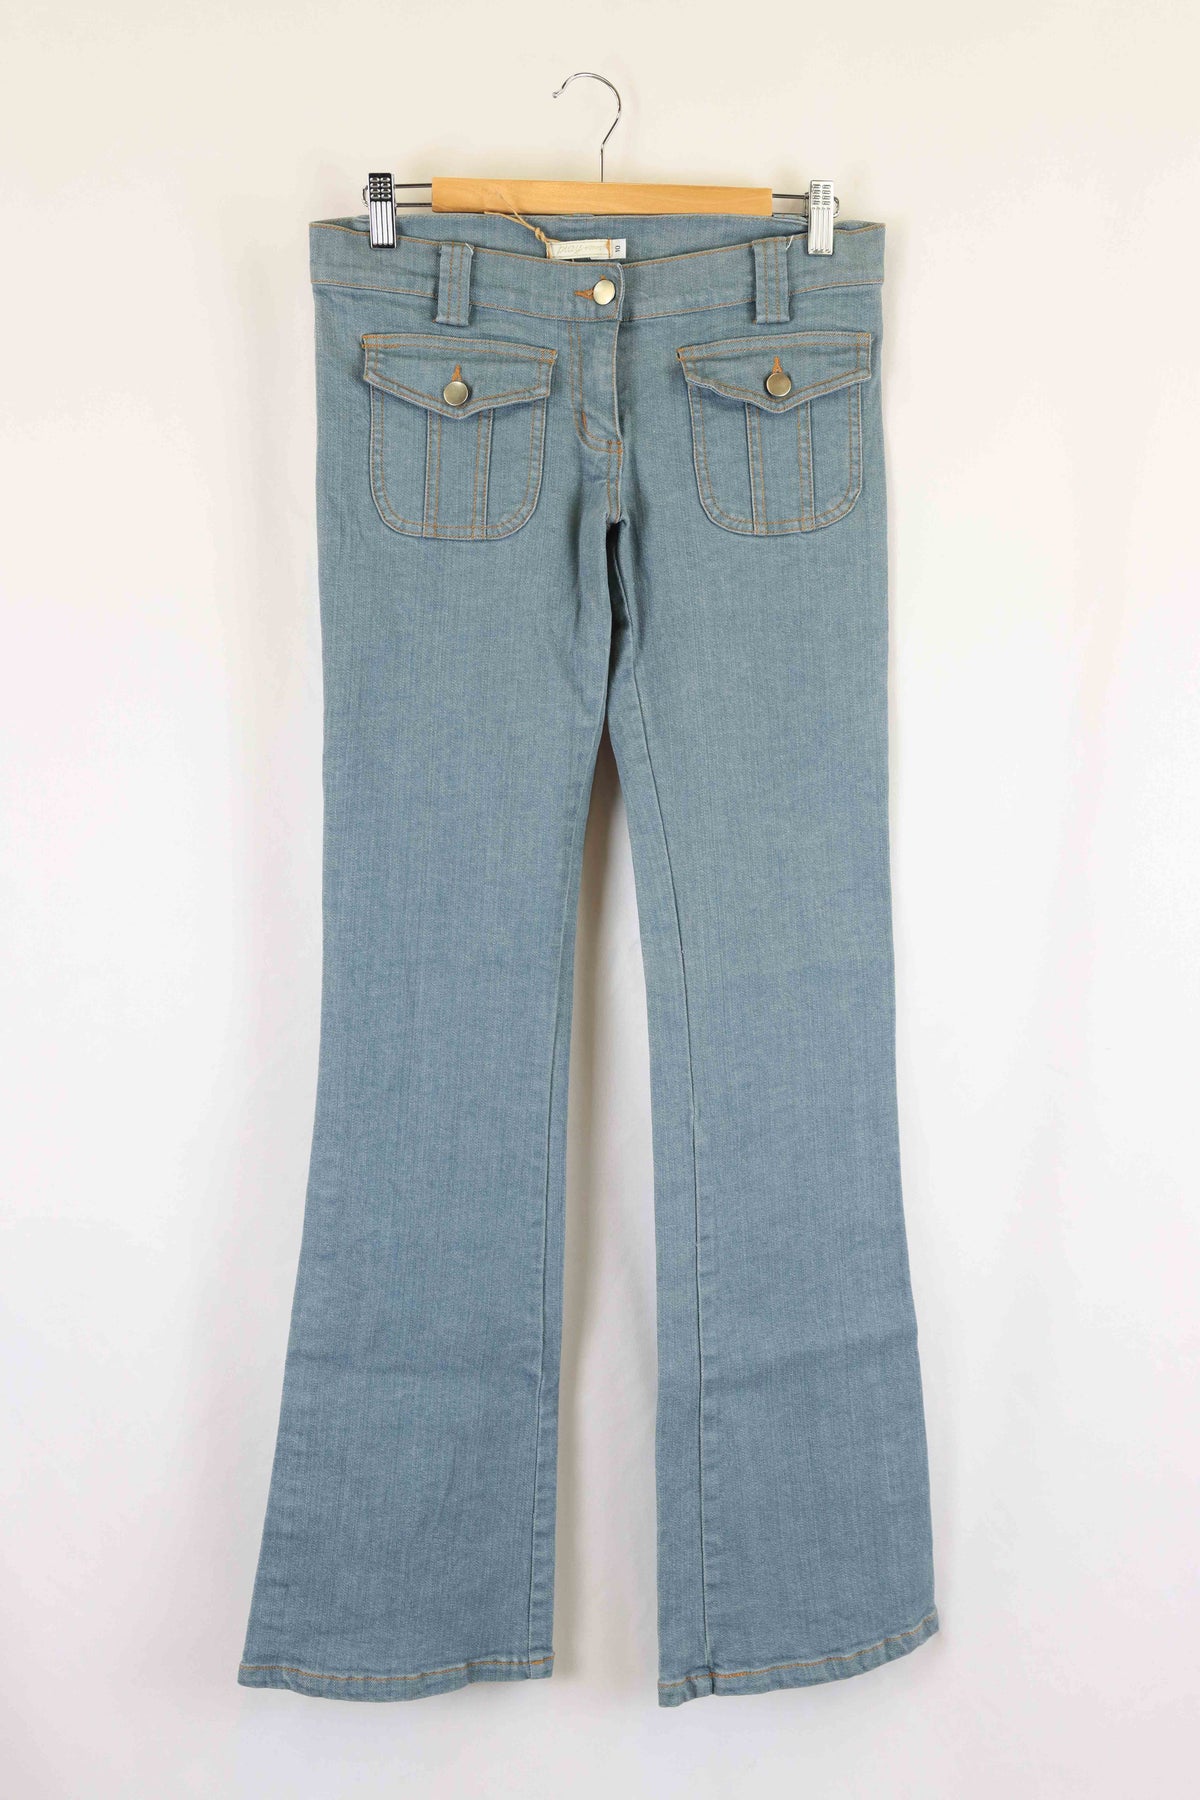 Play Clothing Flared Denim Jeans 10